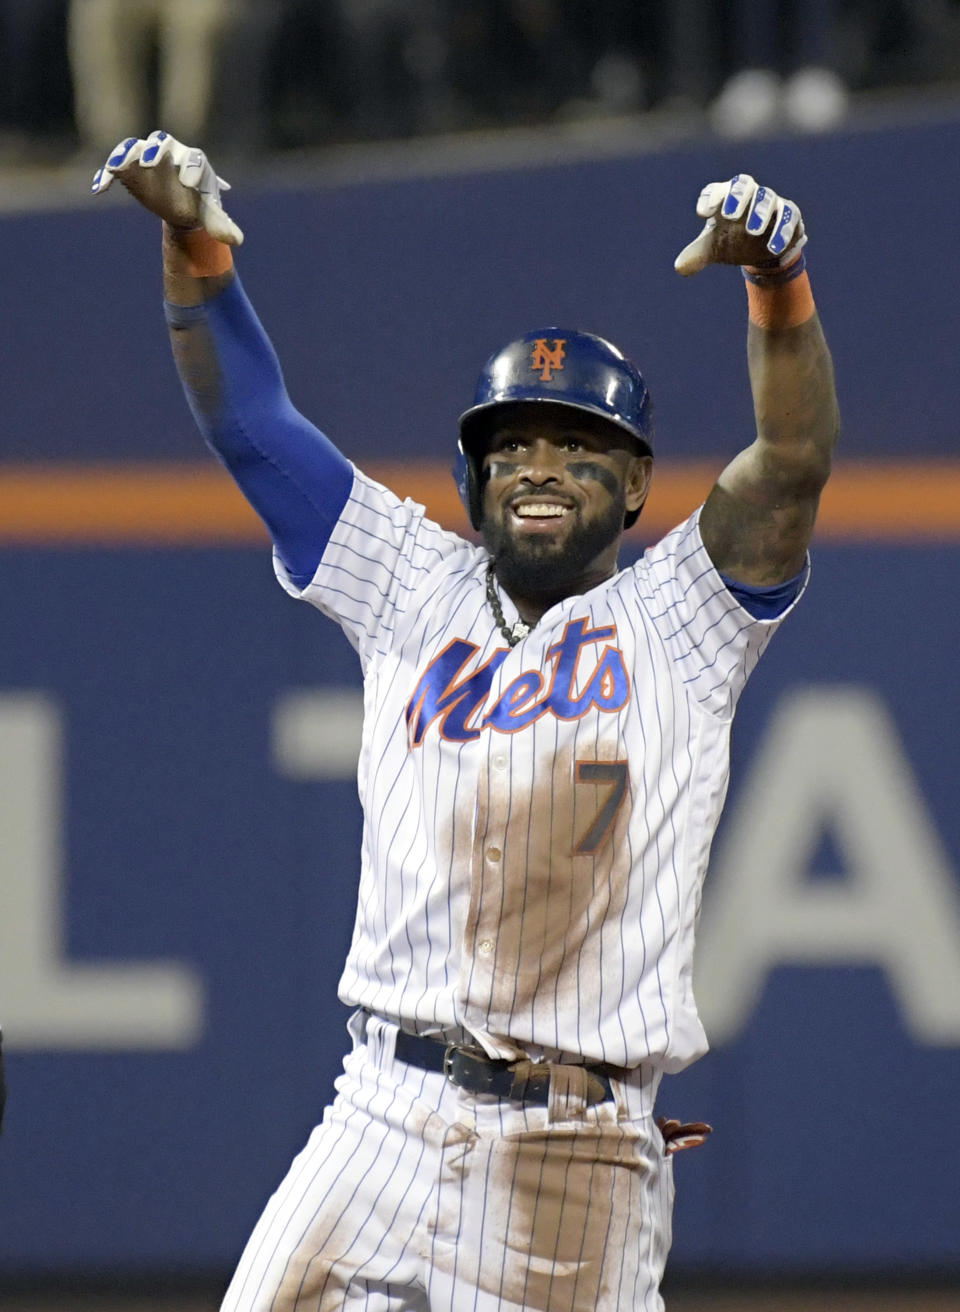 New York Mets shortstop Jose Reyes (7) reacts after hitting a double during the first inning of a baseball game against the Miami Marlins, Saturday, Sept. 29, 2018, in New York. (AP Photo/Bill Kostroun)